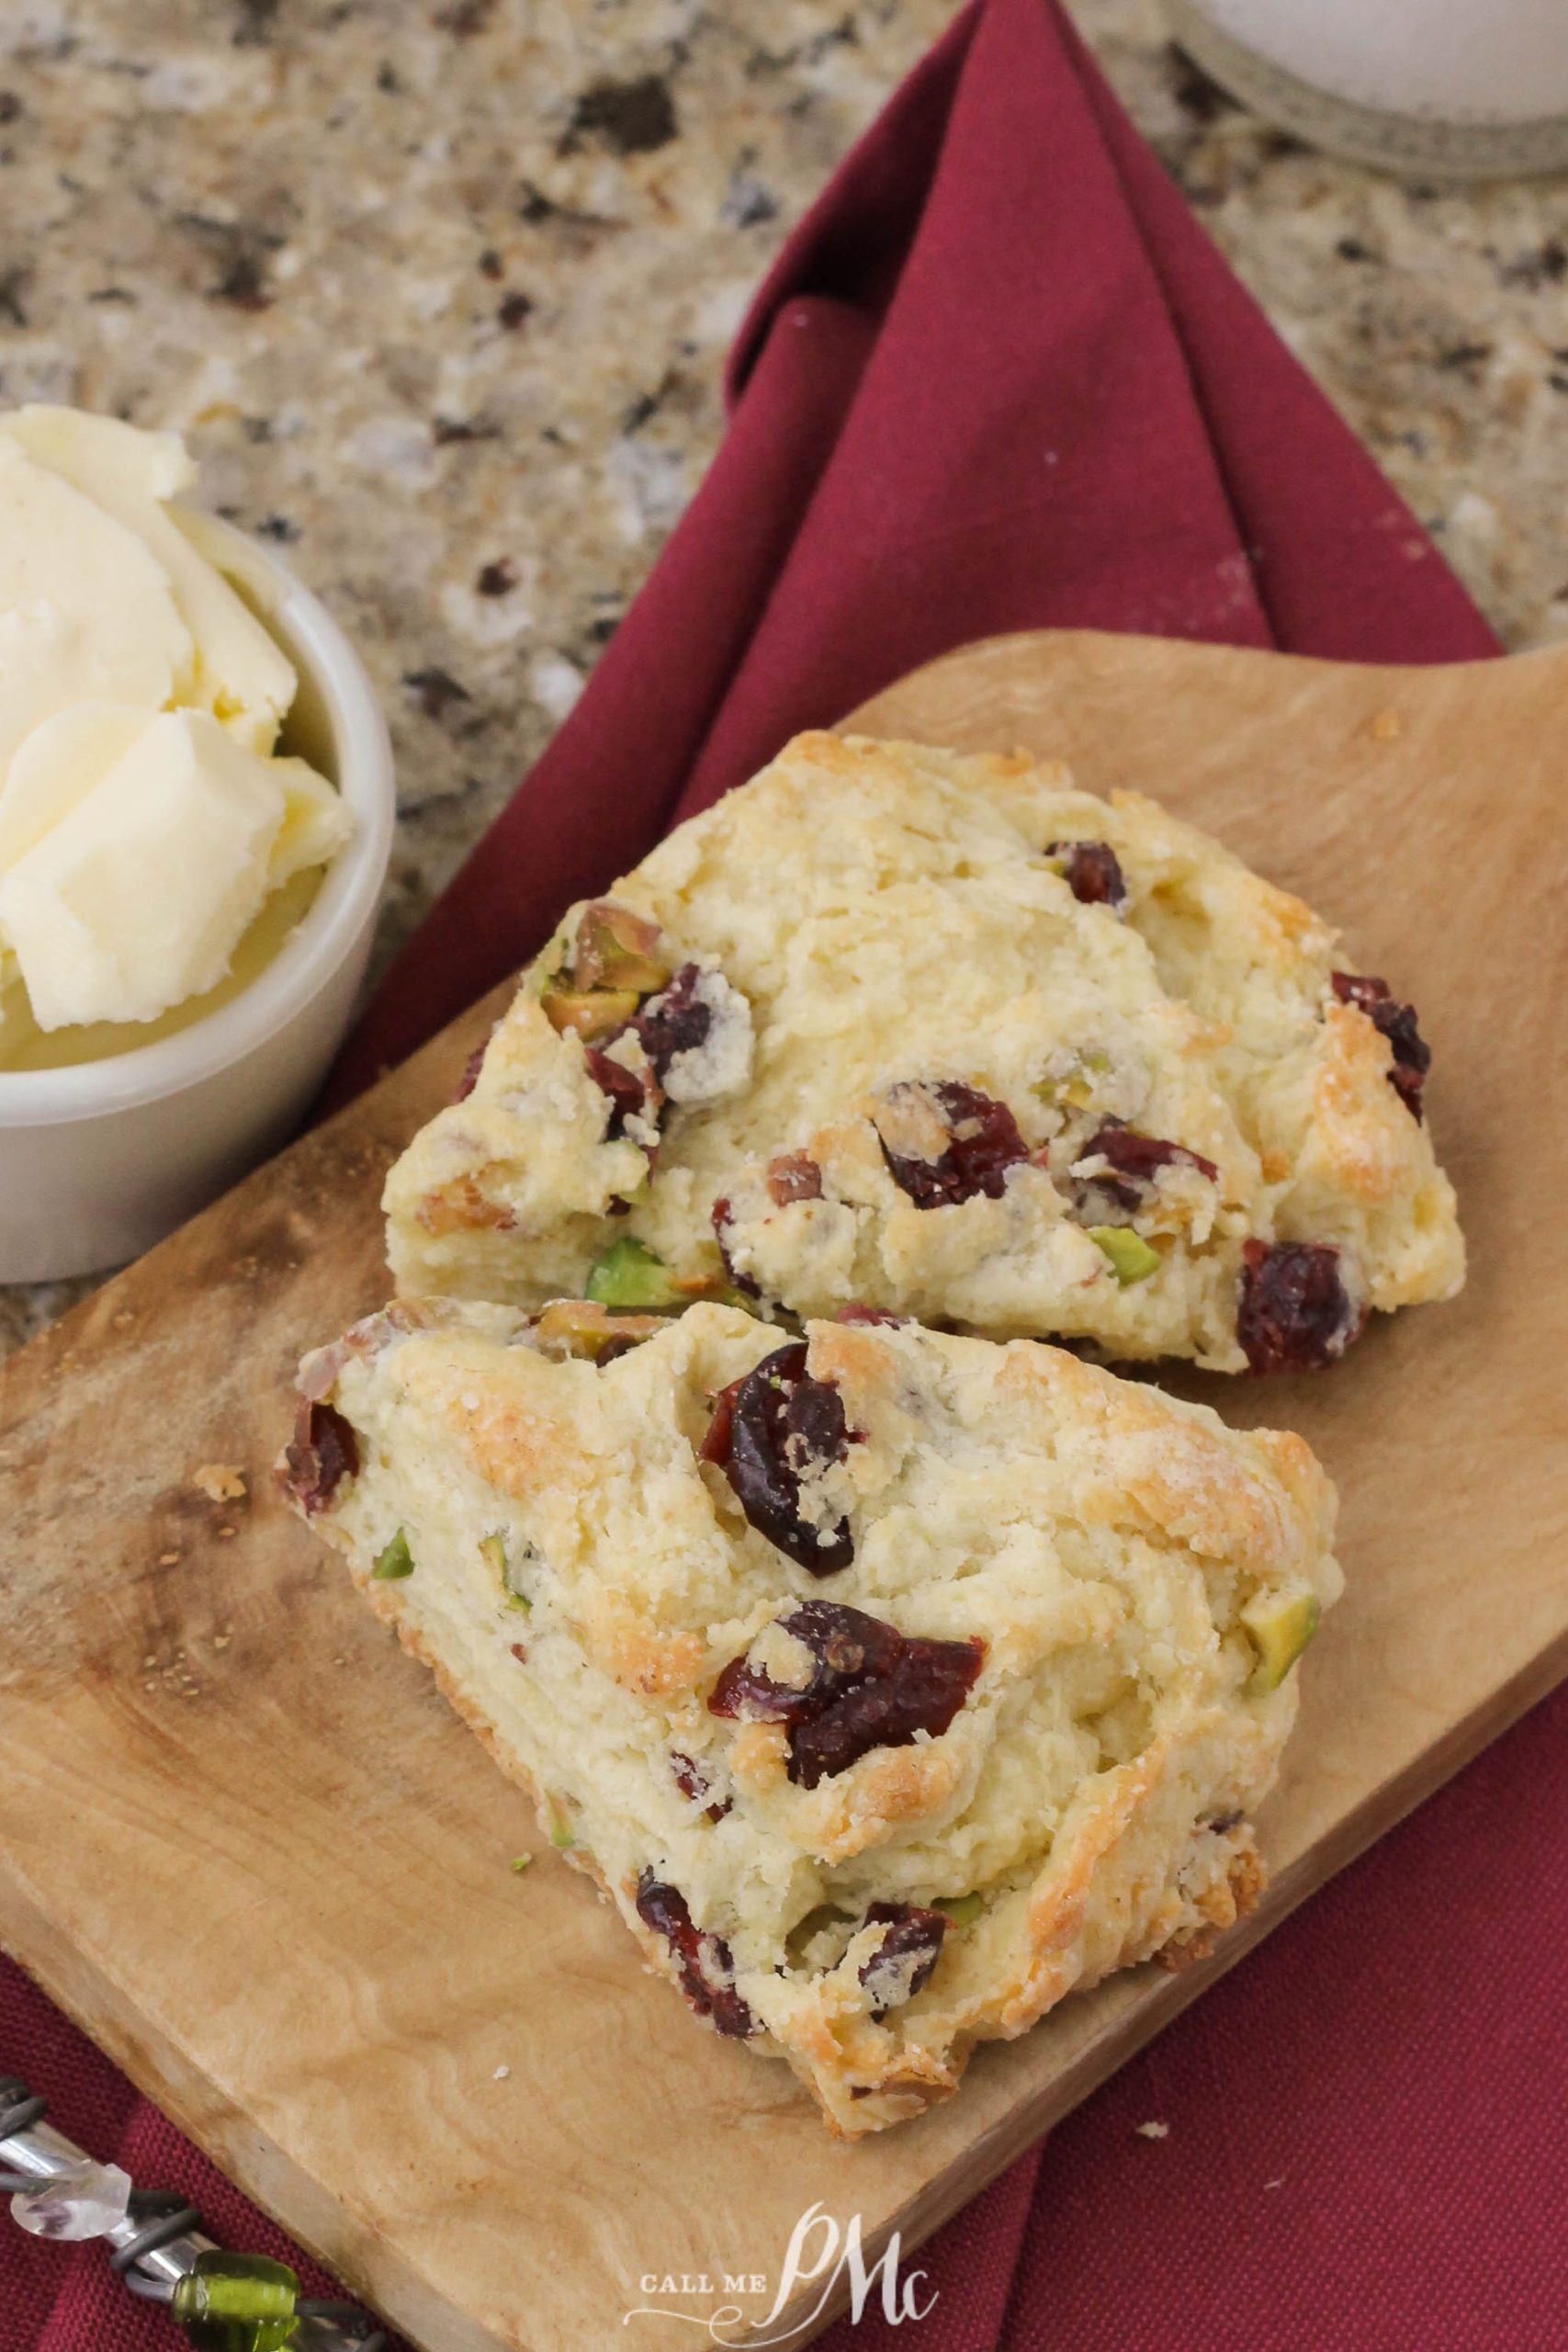 Cranberry and pistachio scones on a wooden board with a bowl of butter, next to a red napkin.